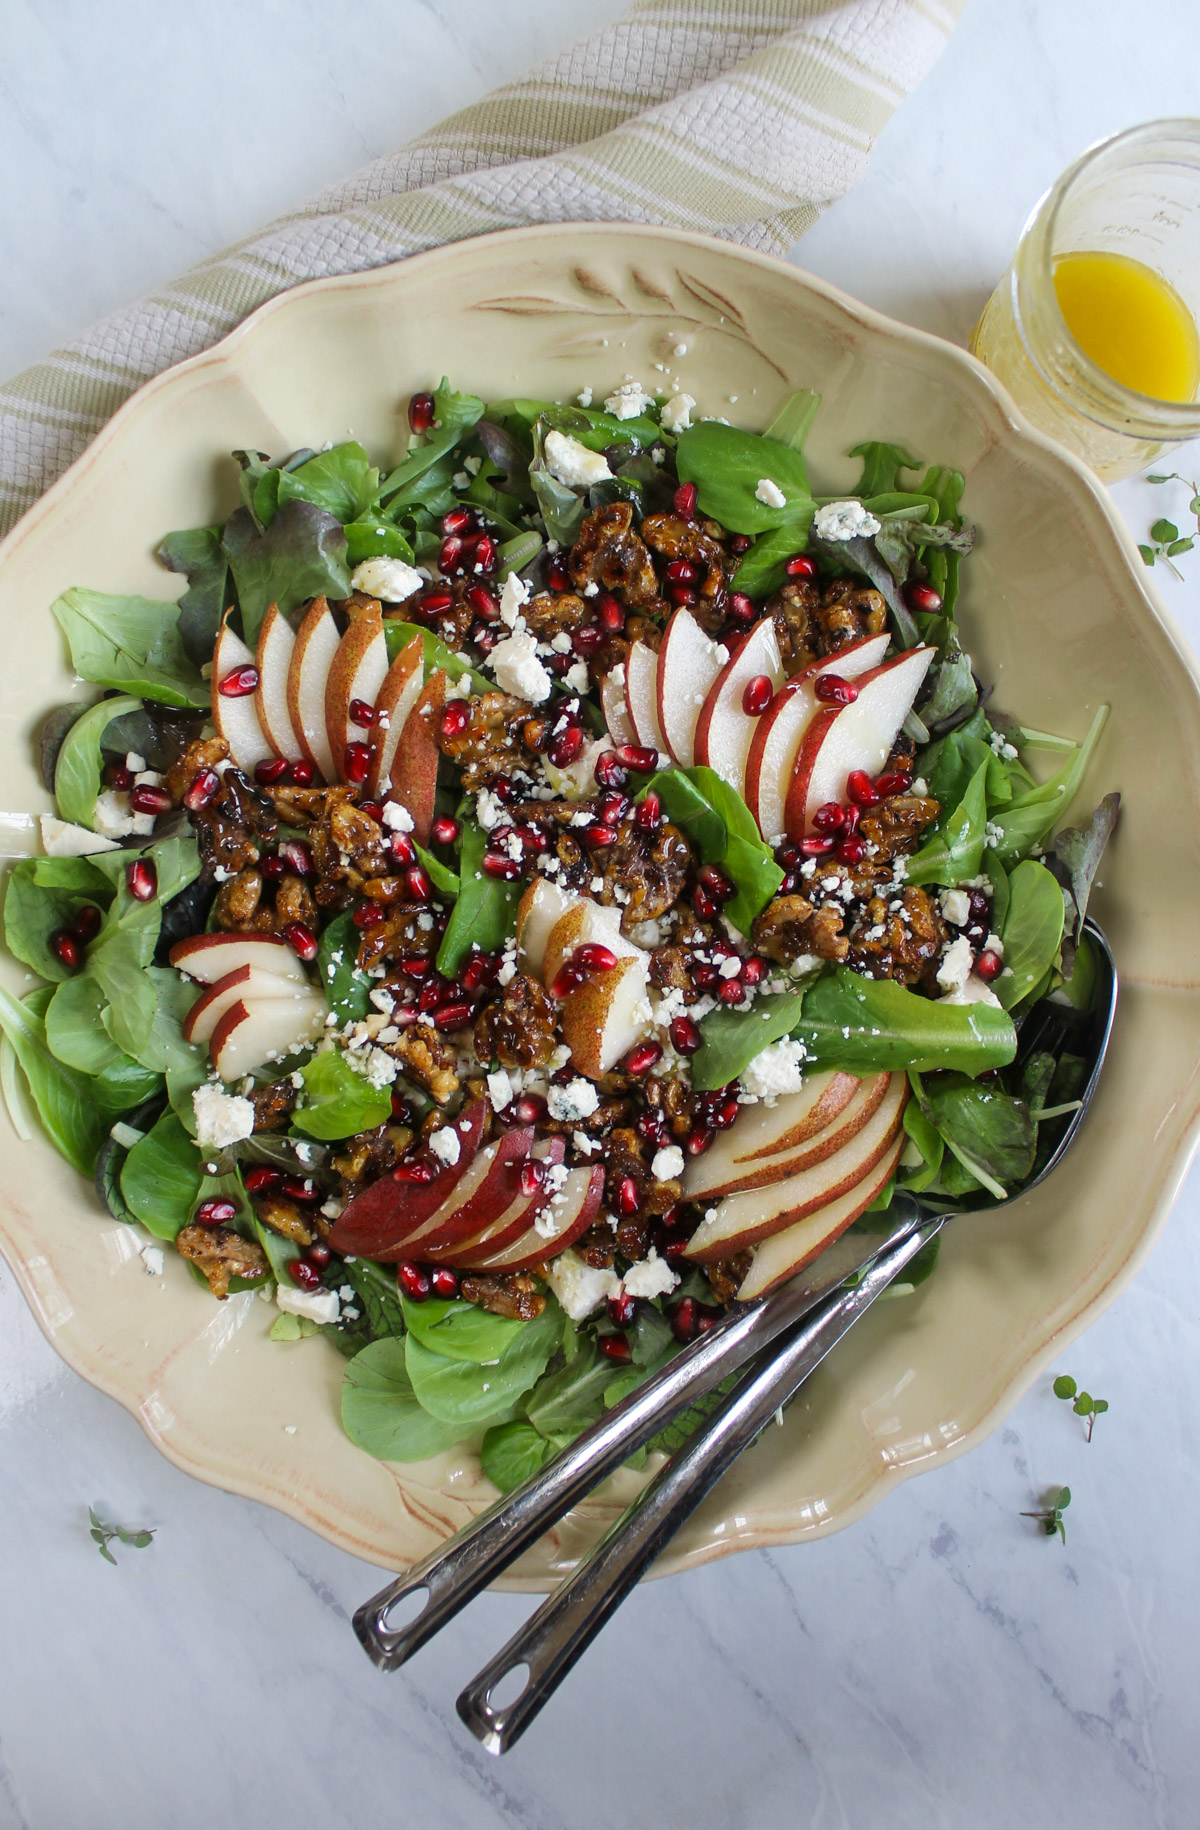 A salad with pear slices, blue cheese crumbles, pomegranate seeds and glazed honey walnuts with a jar of vinaigrette dressing.